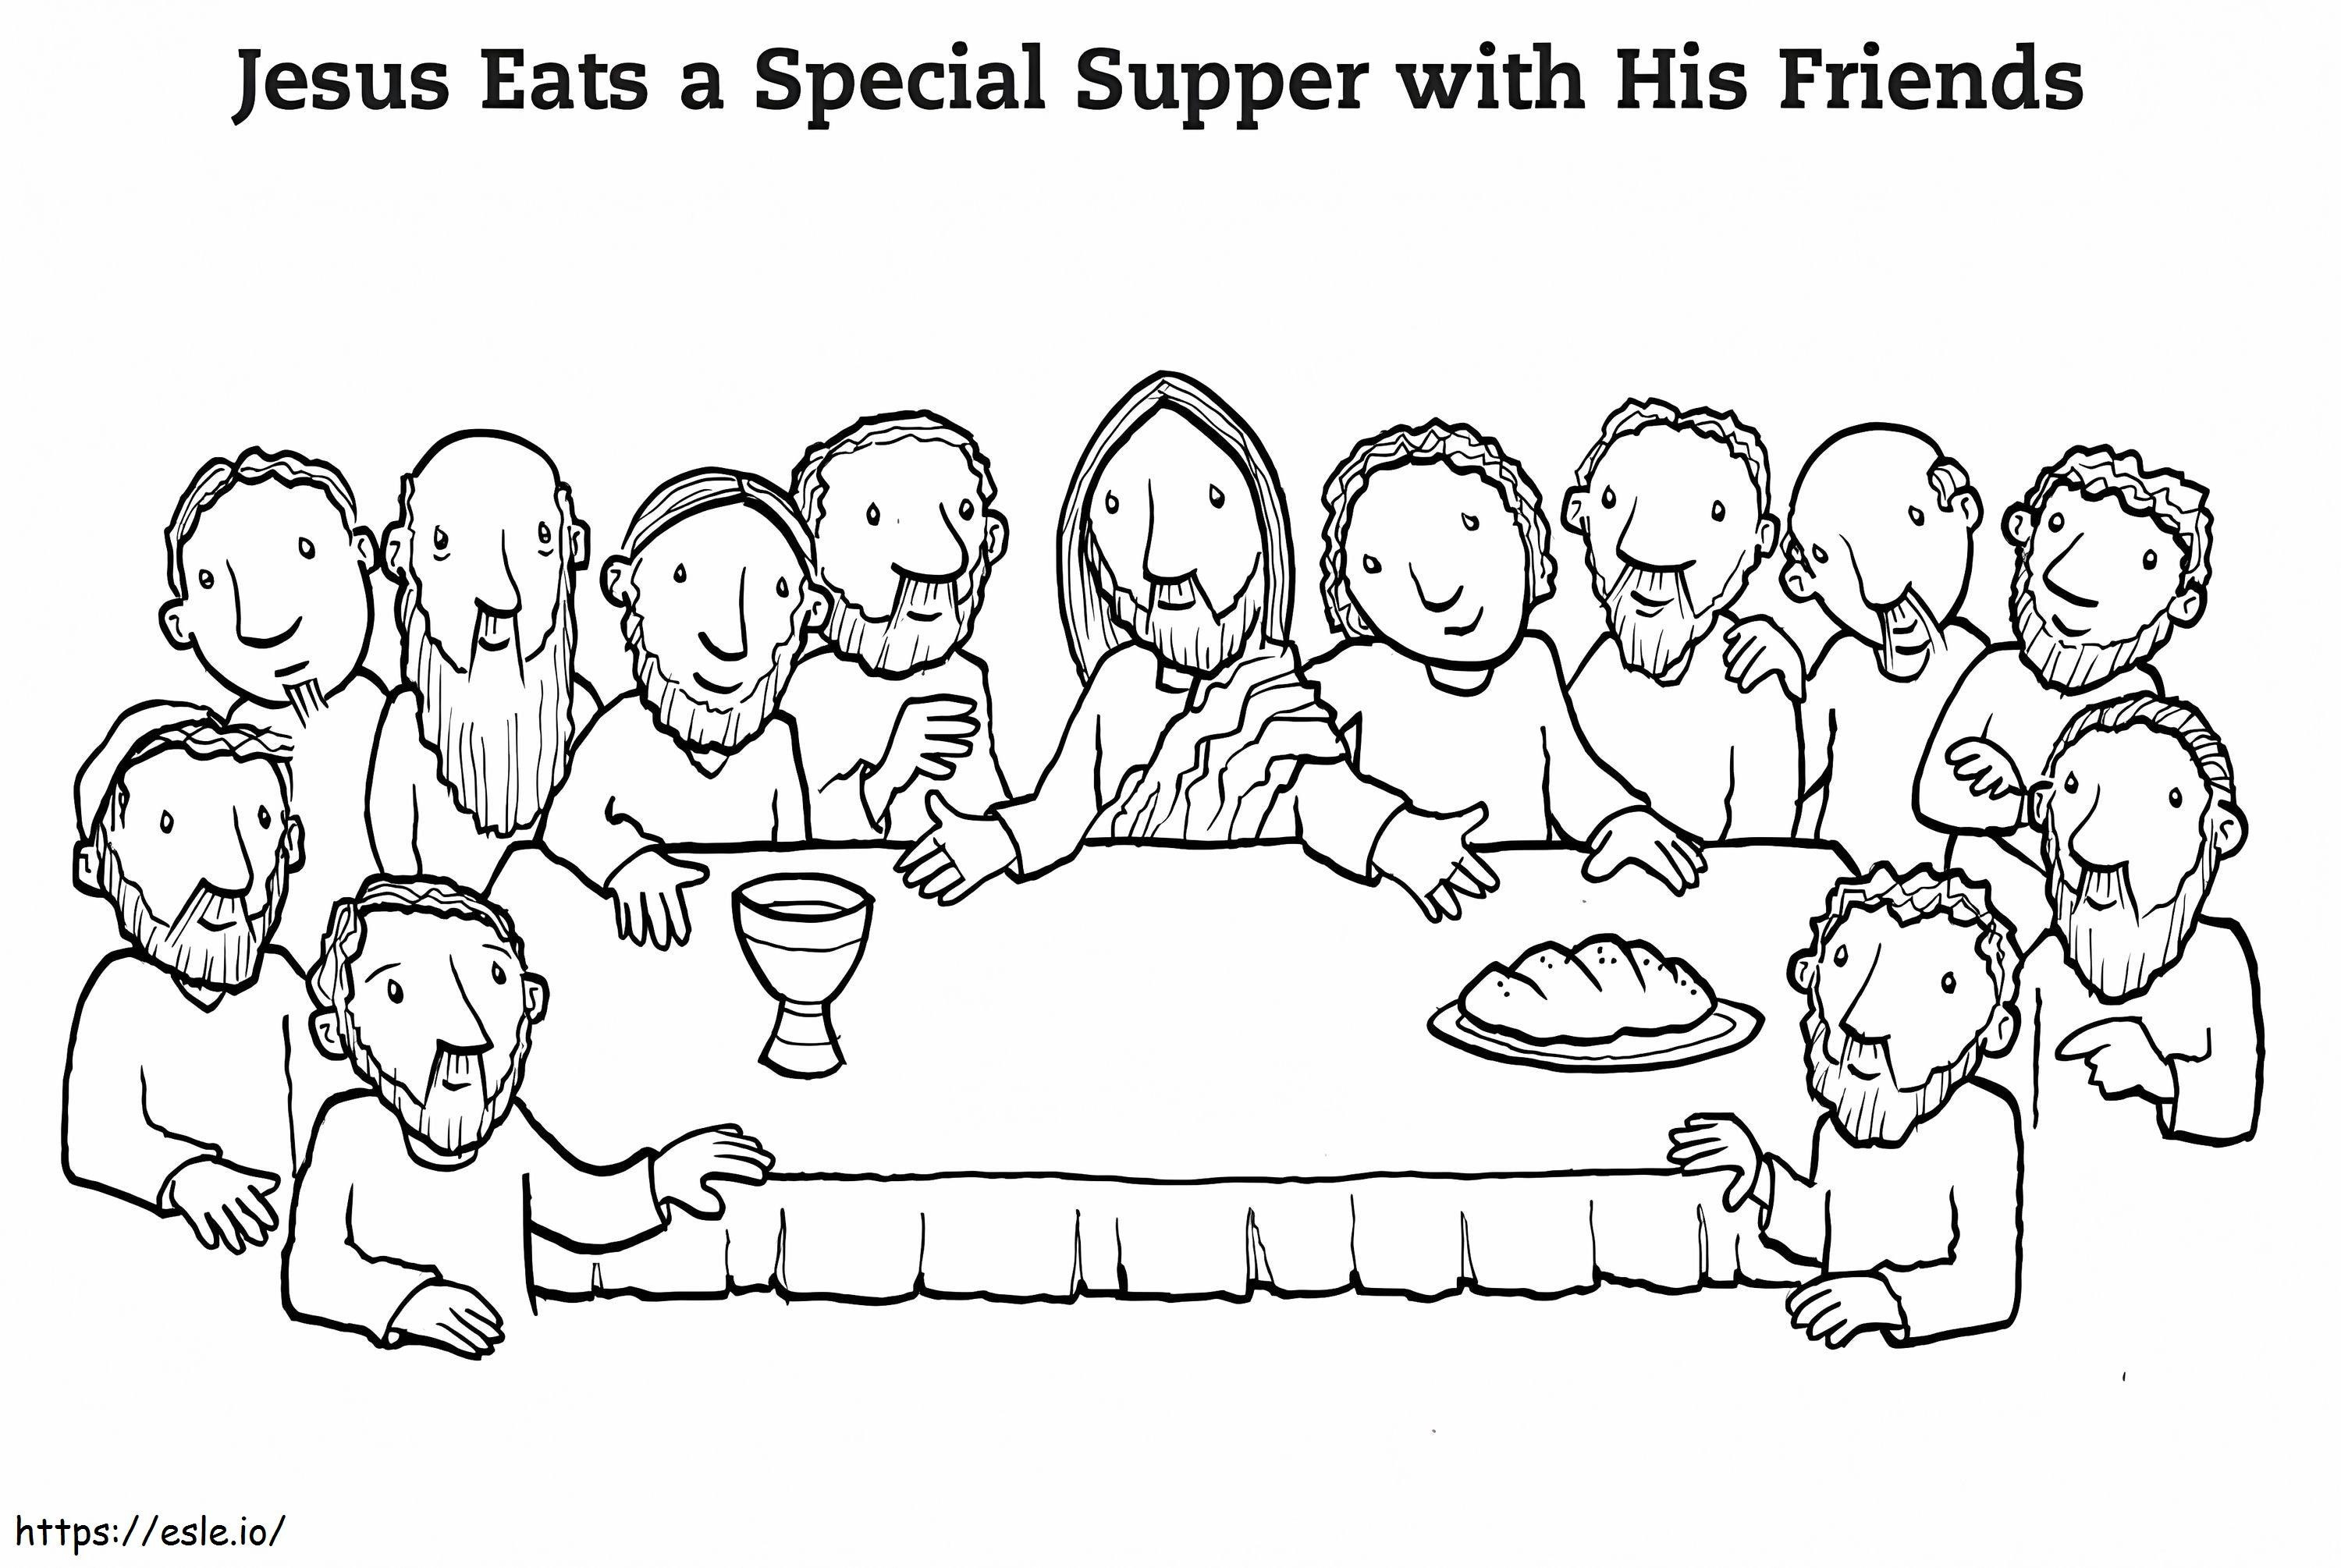 Jesus In Last Supper coloring page